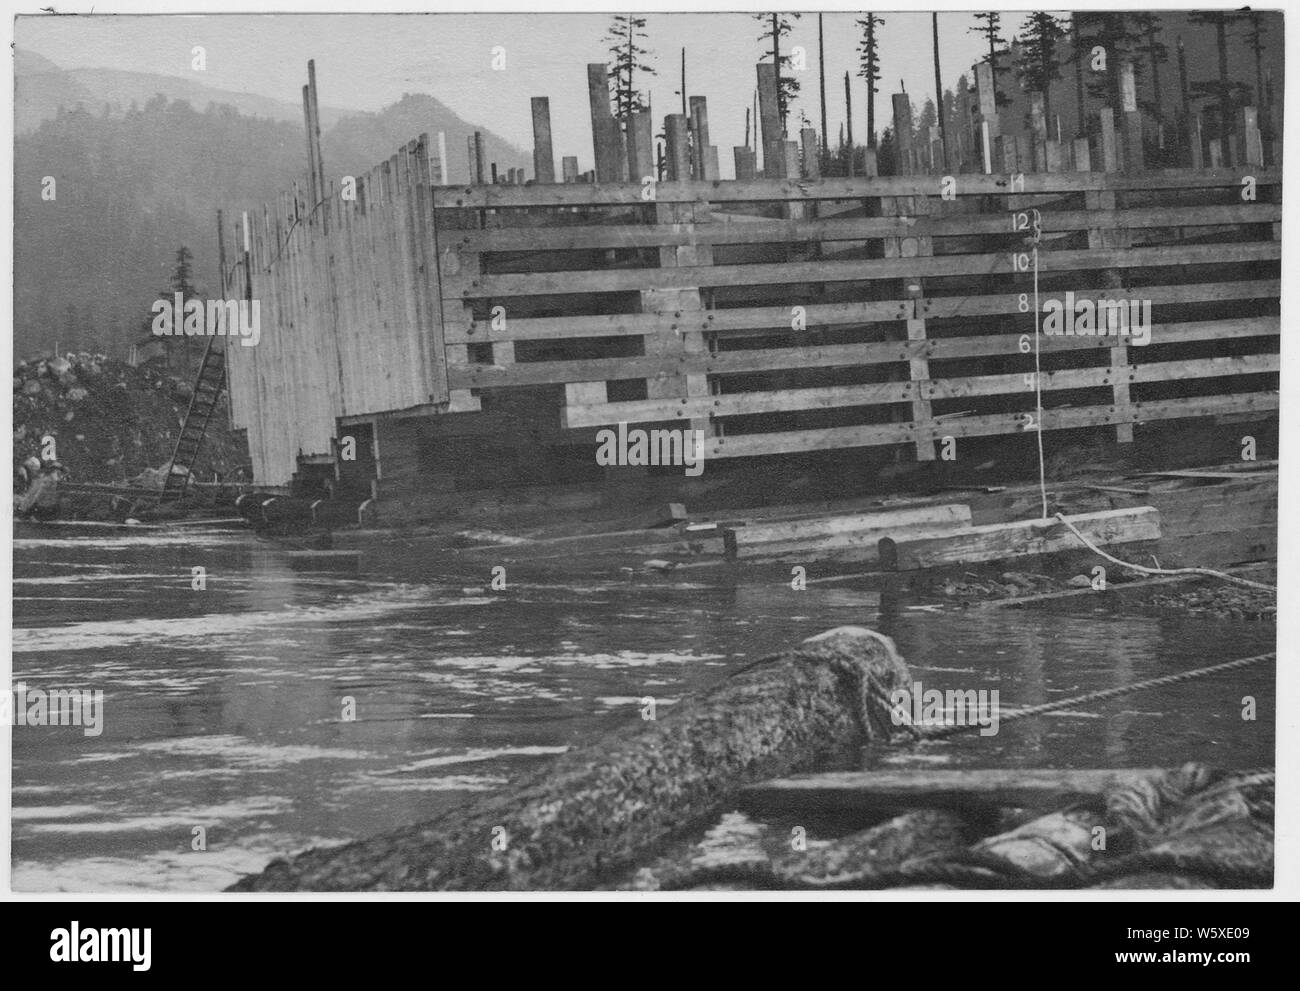 Public Works Administration Project, U.S. Army Corps of Engineers, Bonneville Dam in Oregon, Cofferdam Crib constructed on shore the sheeting cut to fit the irregularities of the river bottom. Stock Photo